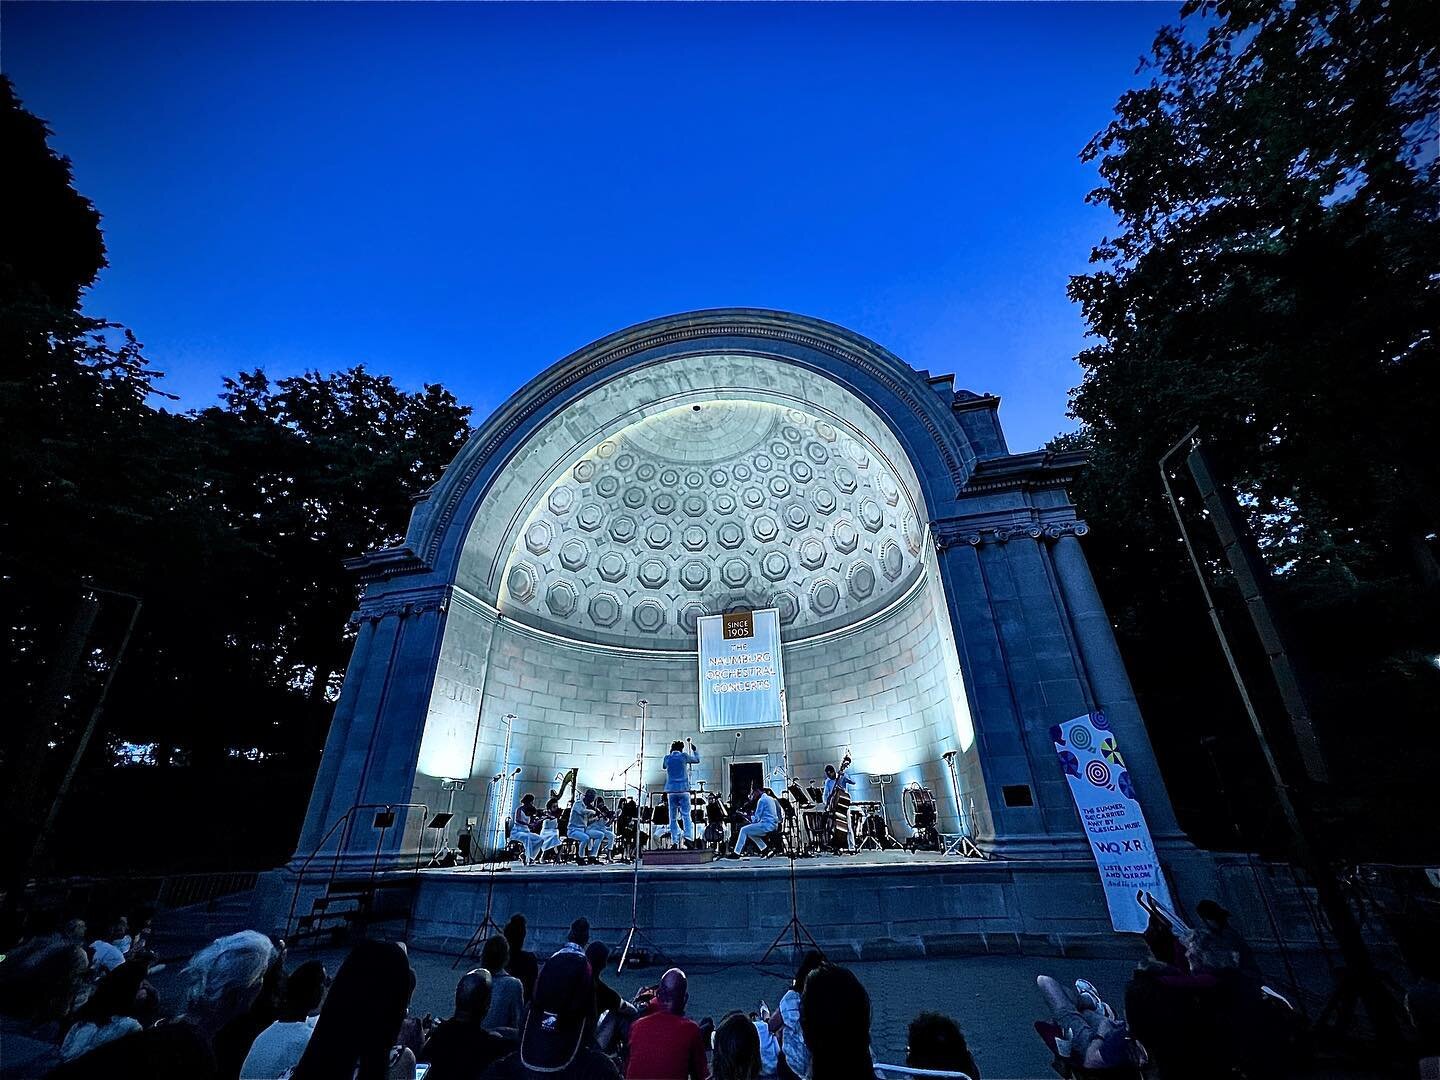 Congratulations to @theknightsnyc on an incredible performance in the park! We&rsquo;re looking forward to collaborating with them on Tuesday, June 21st ending in a 7:30pm concert at Good Shepherd-Faith Presbyterian Church 152 W 66th St.